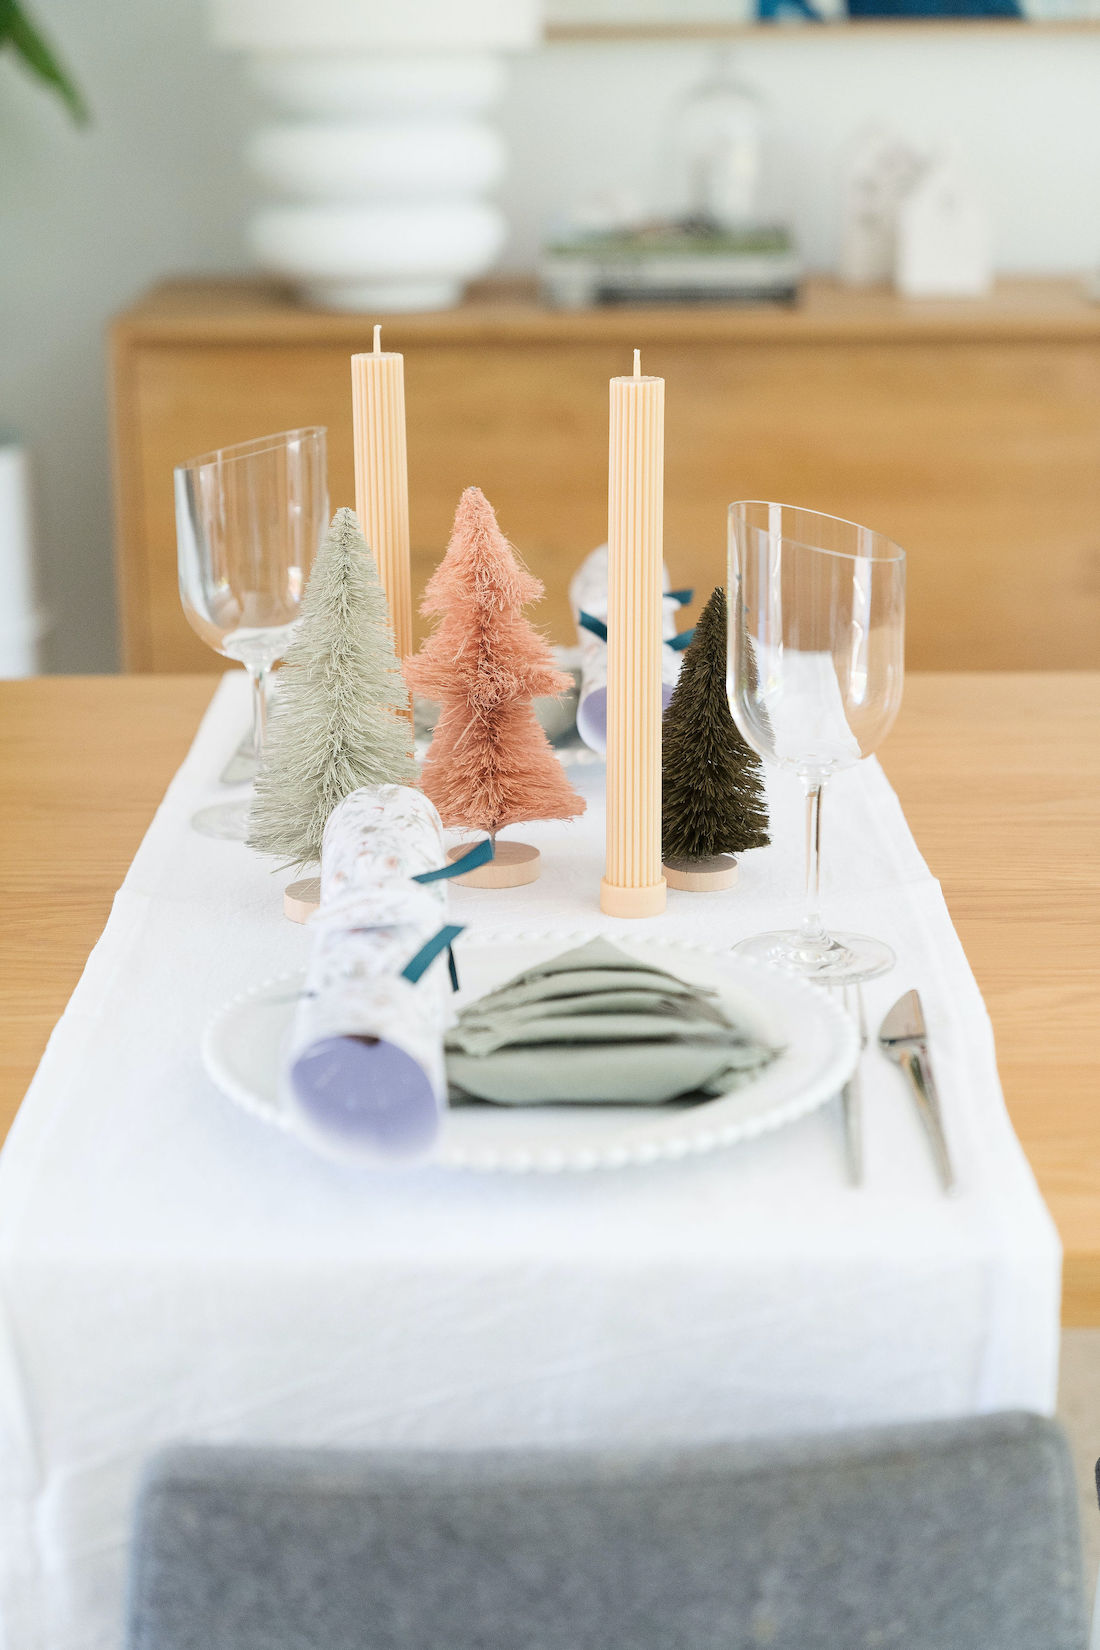 Pillar candles on table setting